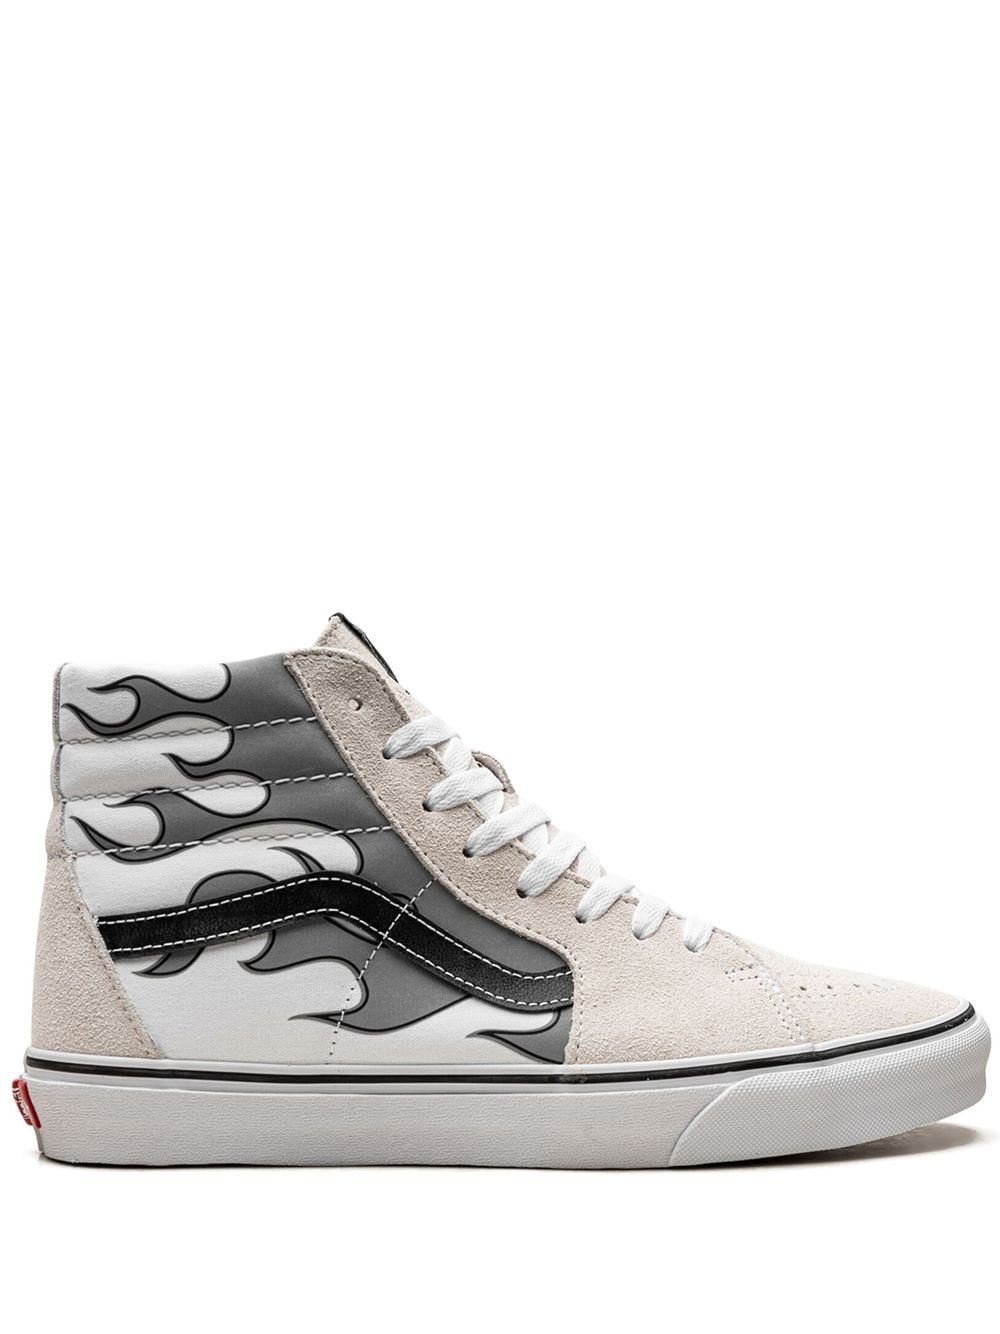 Vans Sk8 Hi "reflective Flame" Trainers In White